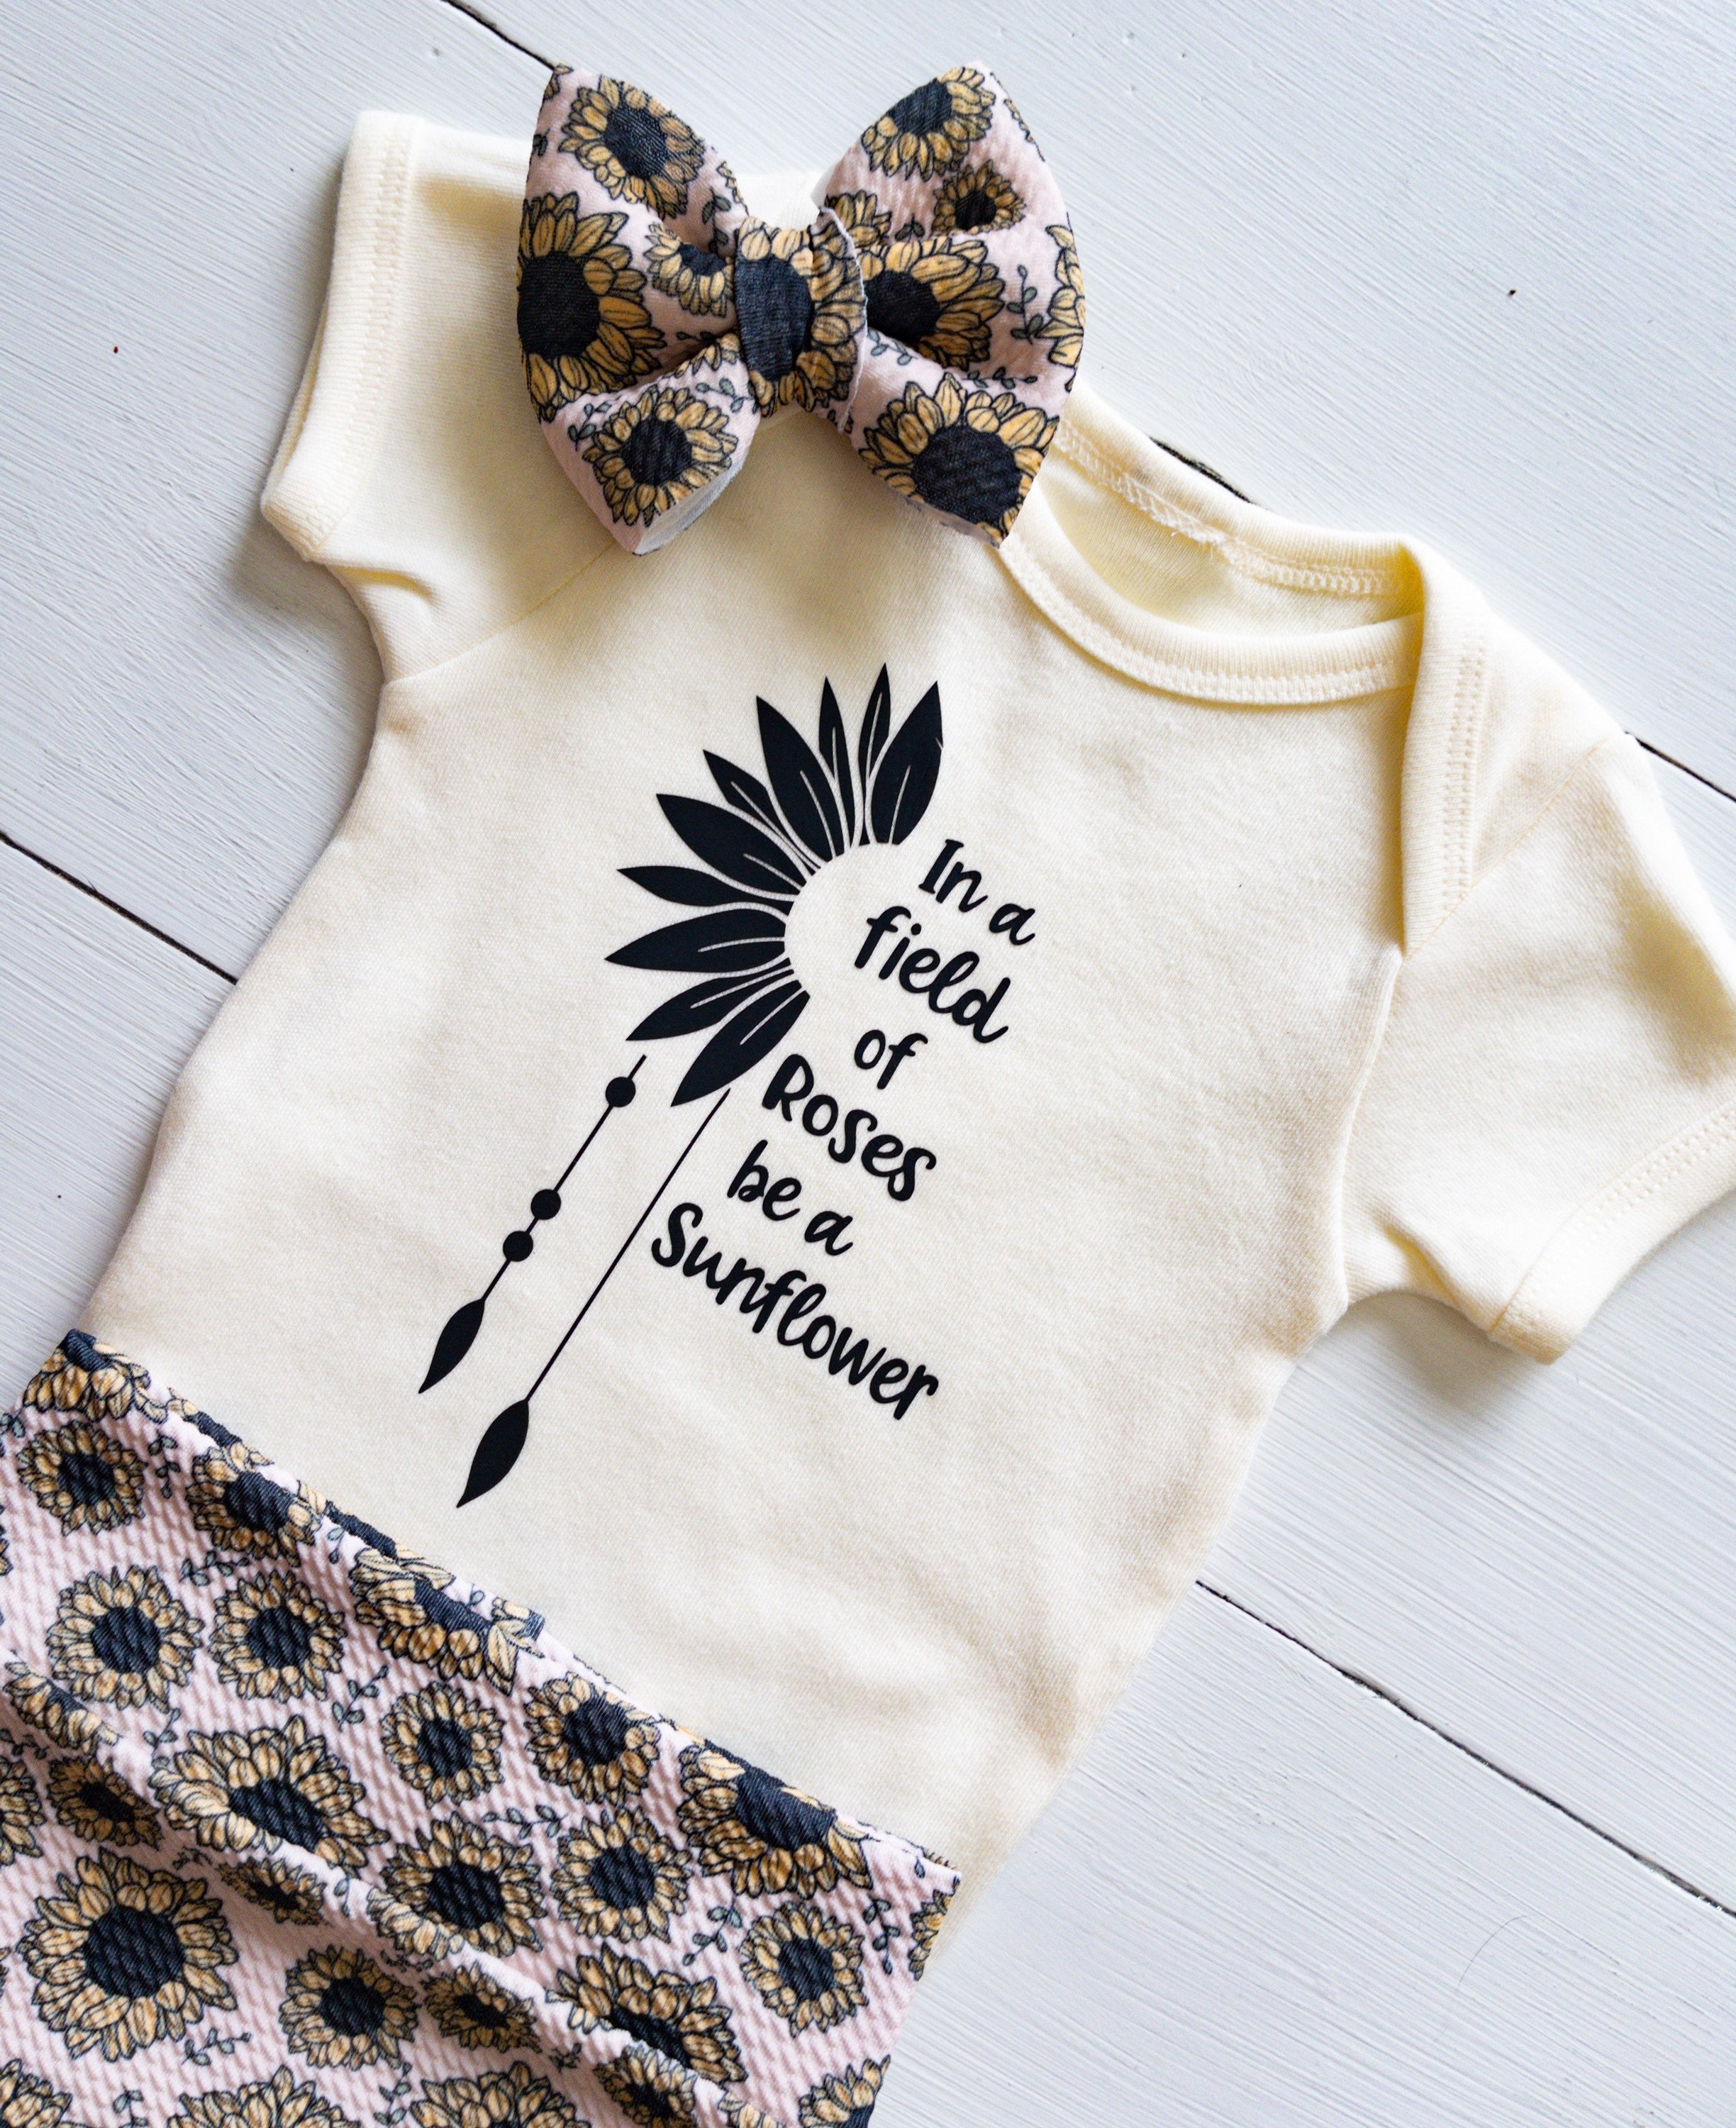 Be a Sunflower Baby Bummy Outfit